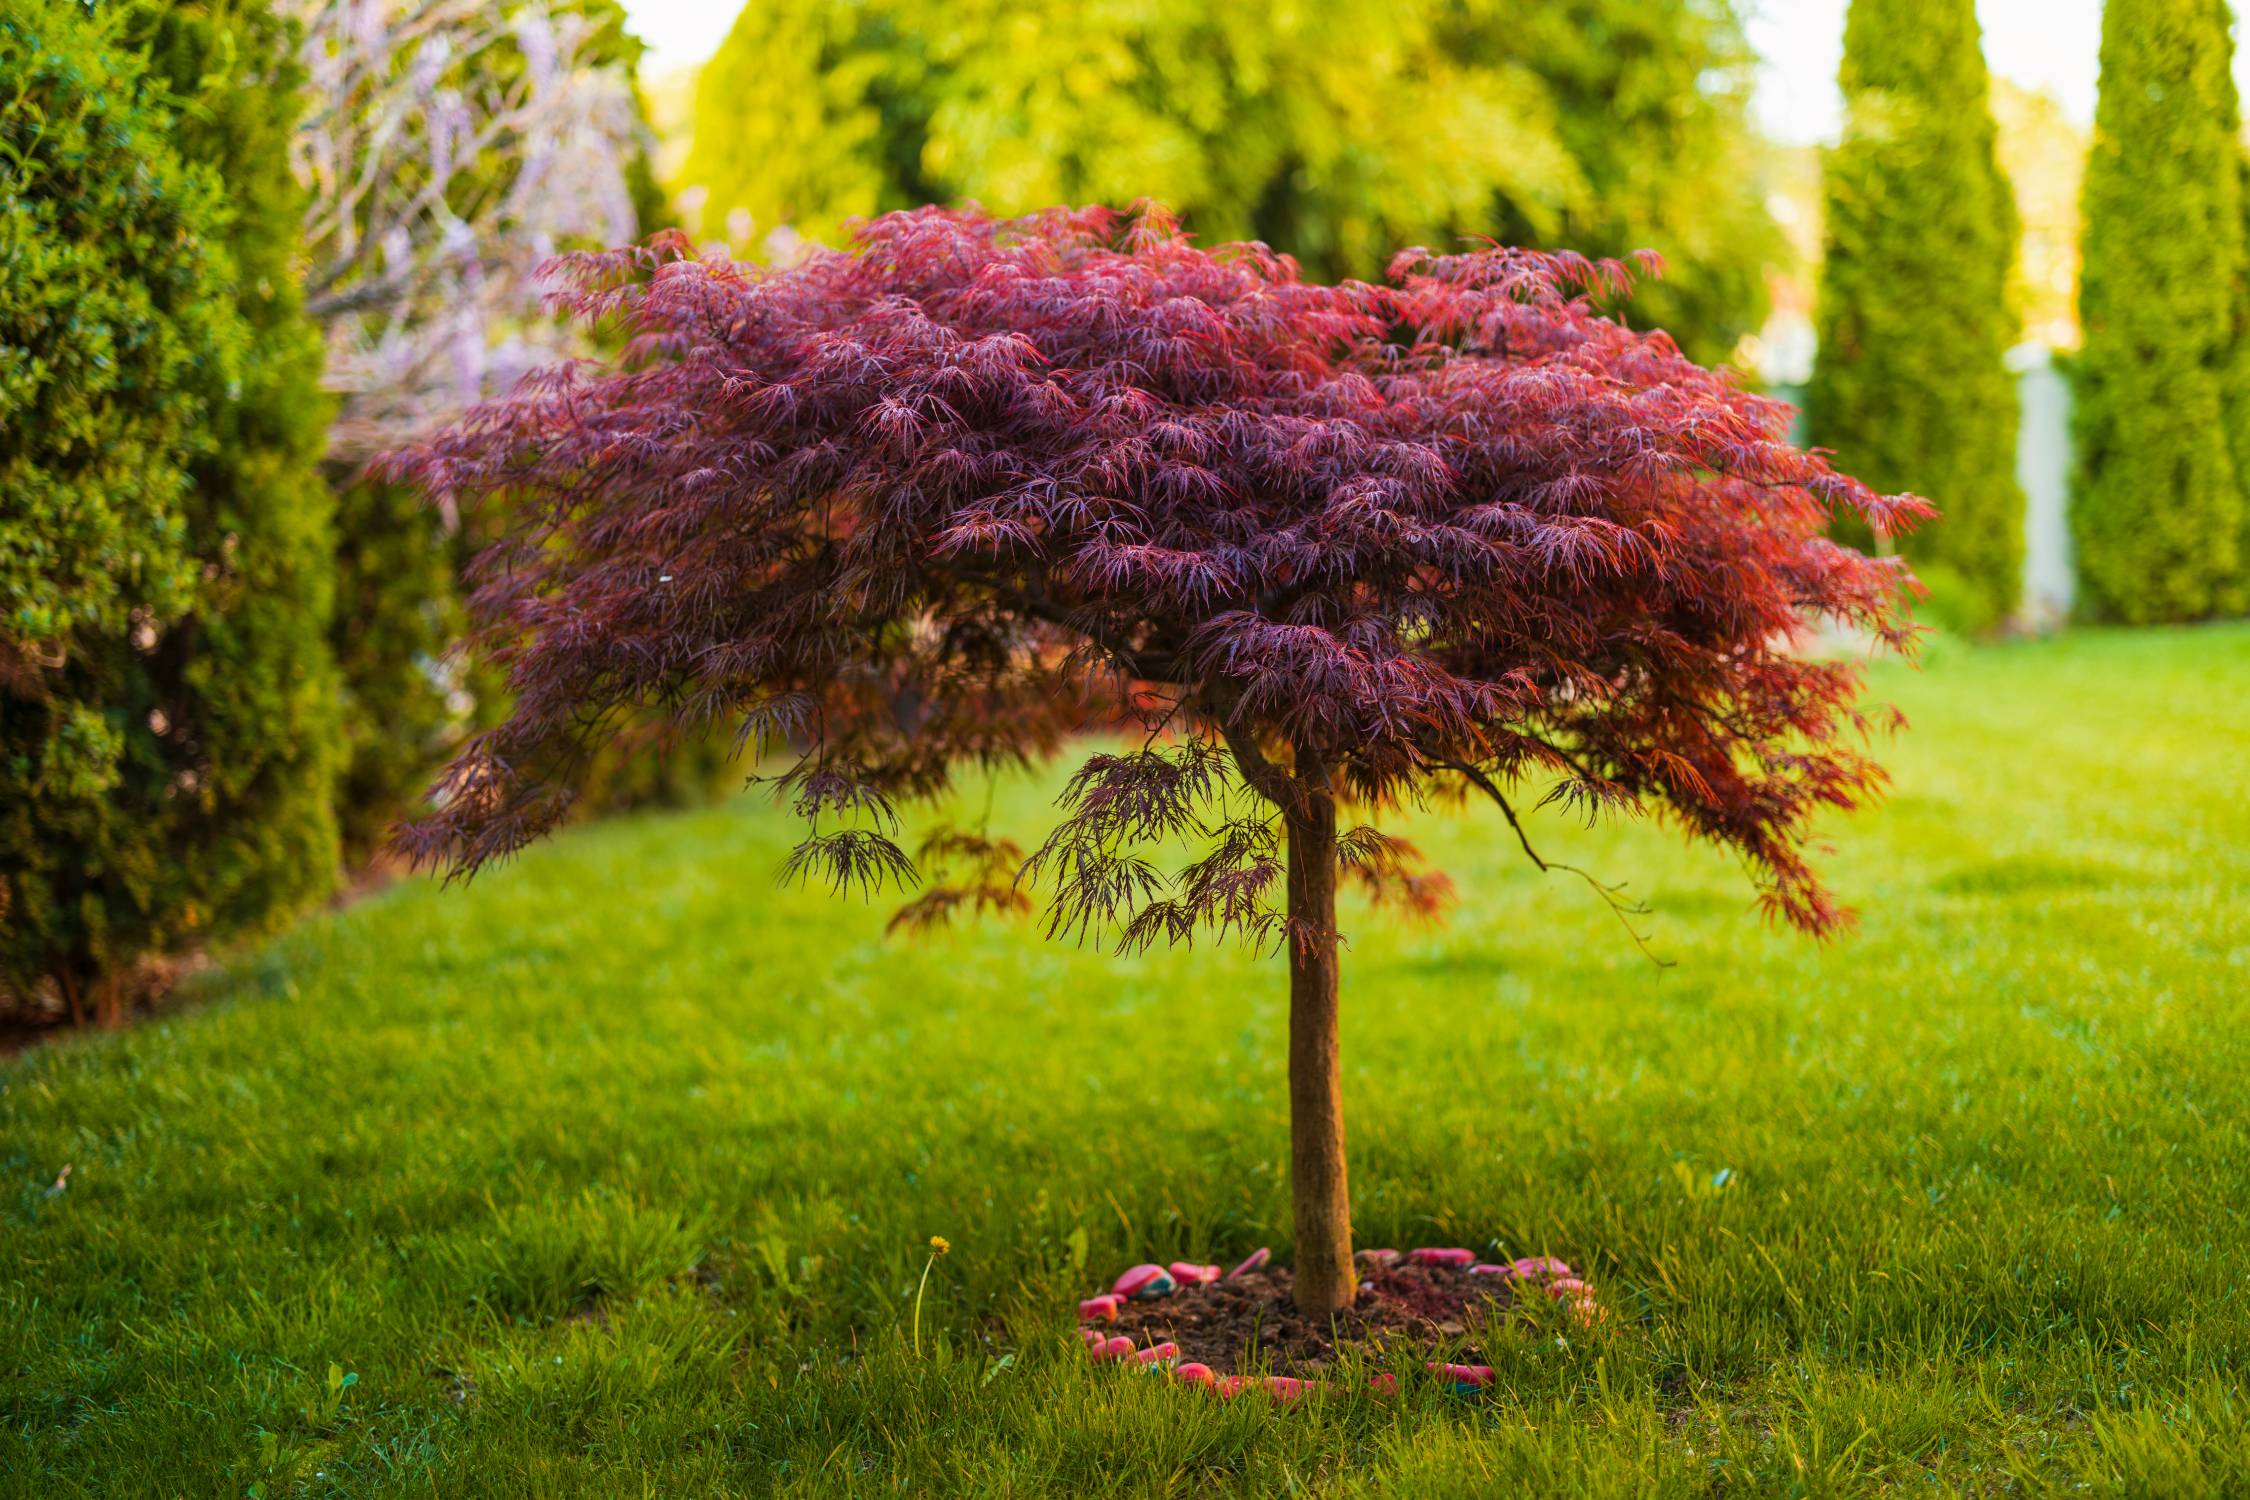 How To Take Care of Your Garden’s Japanese Maple